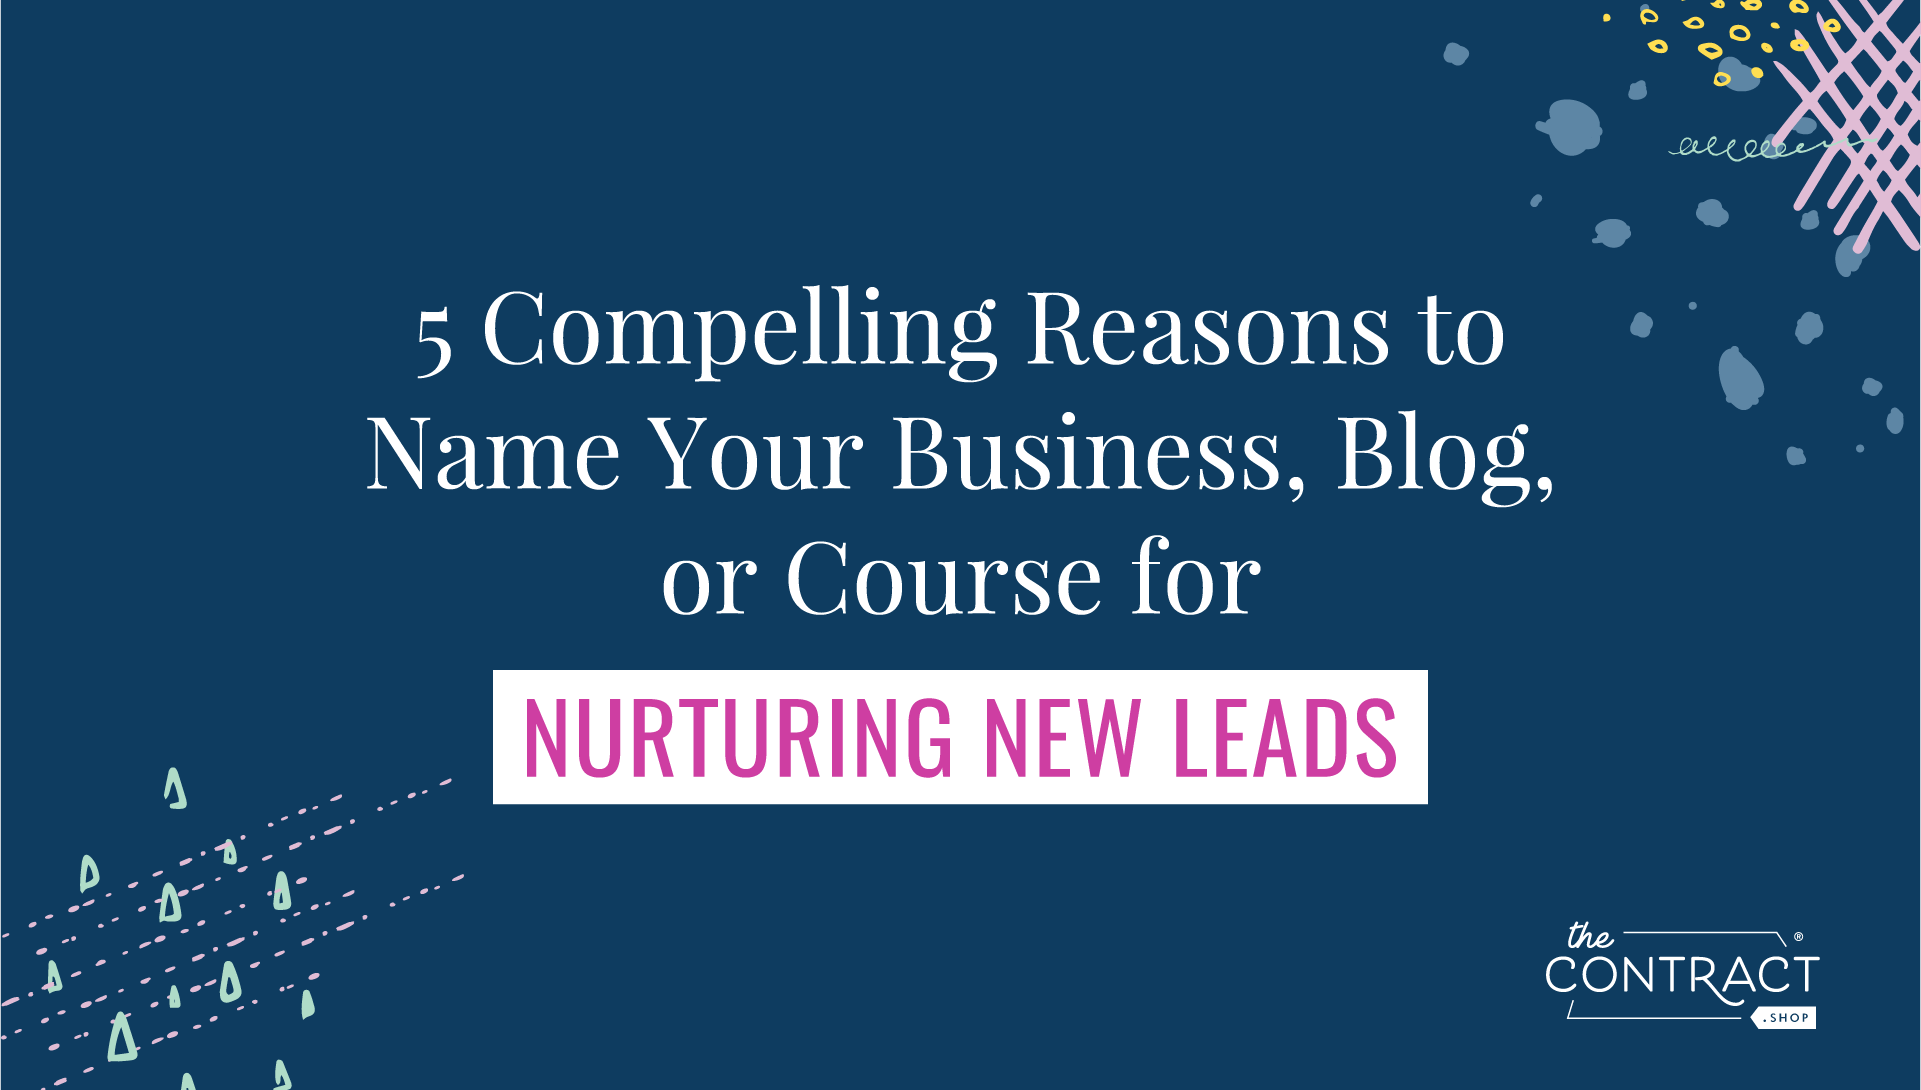 5 compelling reasons to name your business, blog, or course for nurturing new leads